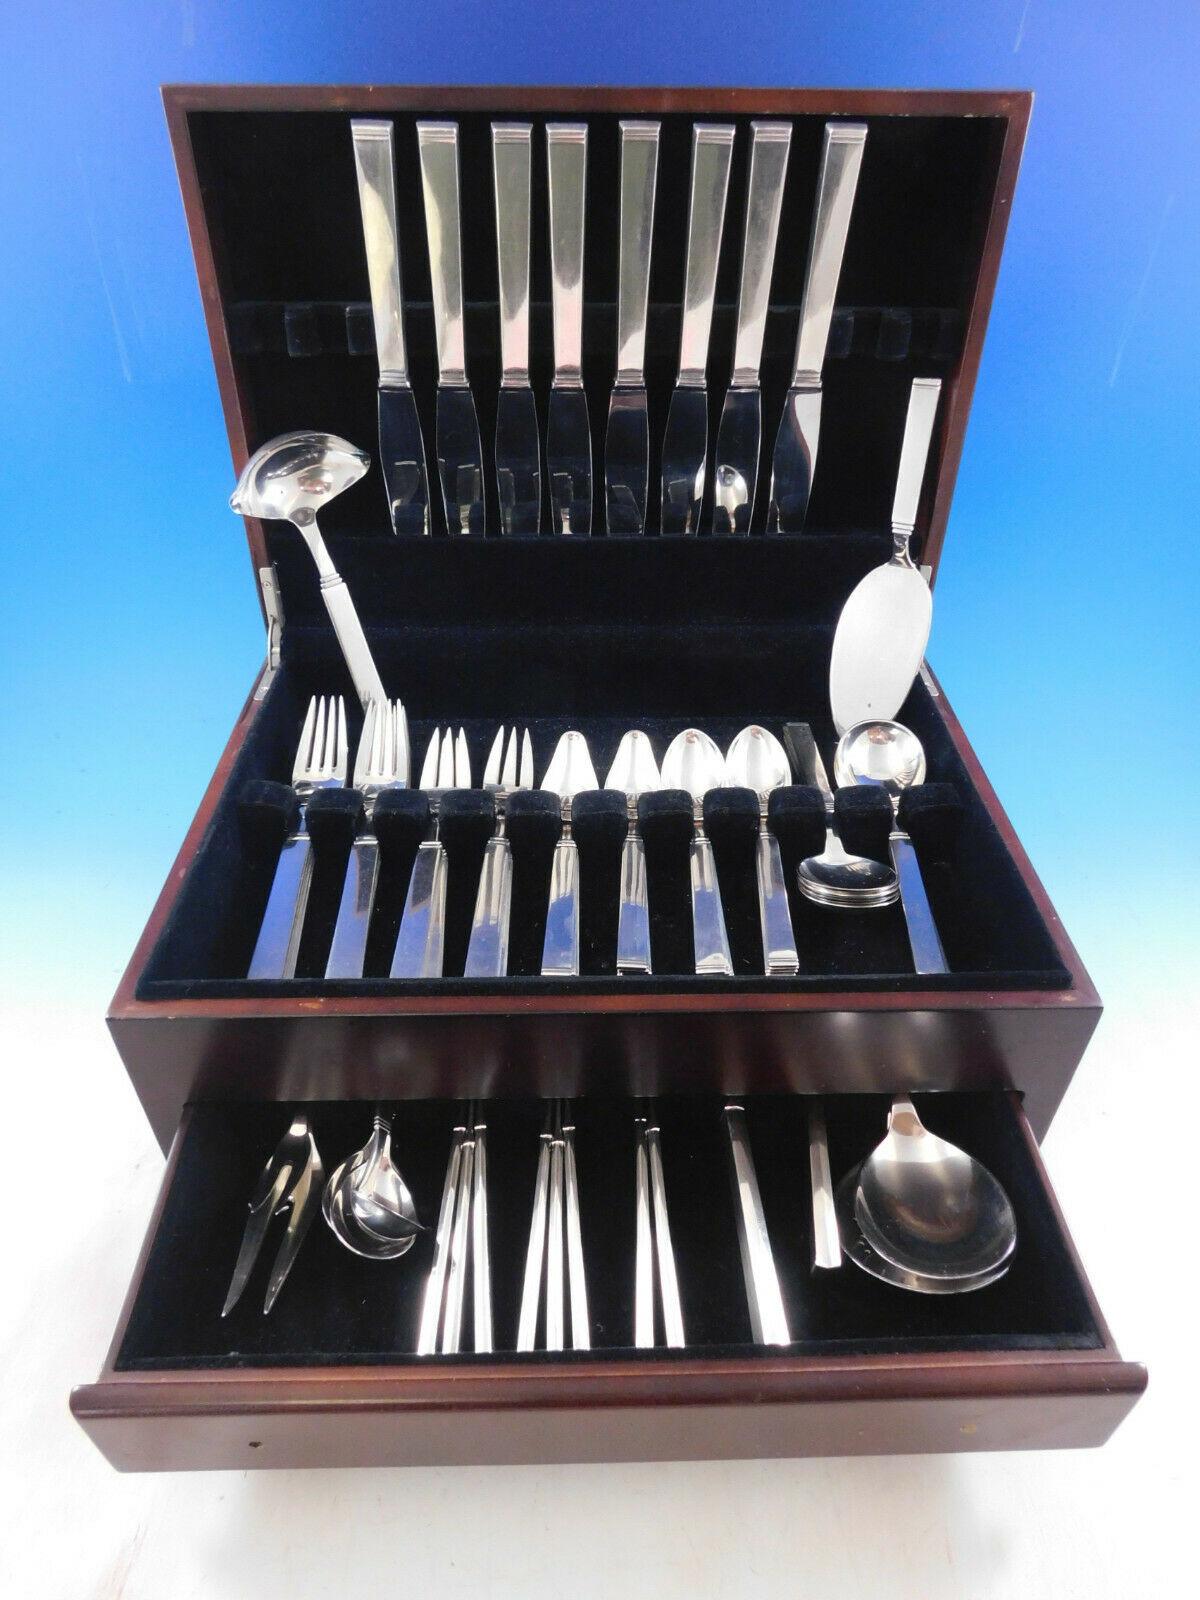 Funkis III by W&S Sorensen Danish sterling silver Scandinavian Modern Flatware set, 67 pieces. This set includes:

8 Dinner Knives, 10